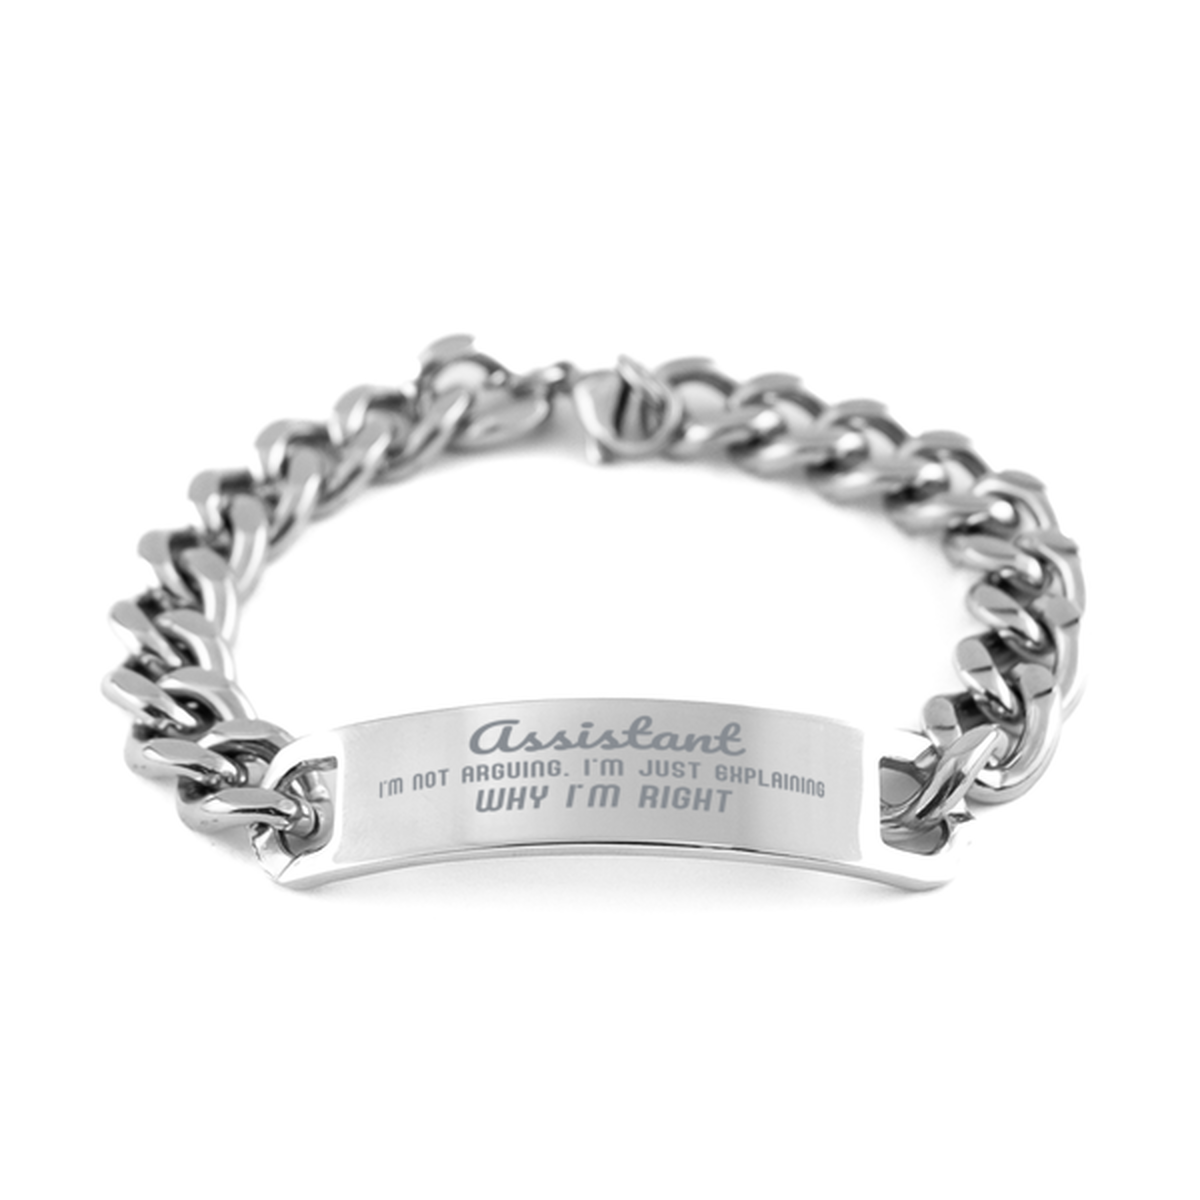 Assistant I'm not Arguing. I'm Just Explaining Why I'm RIGHT Cuban Chain Stainless Steel Bracelet, Graduation Birthday Christmas Assistant Gifts For Assistant Funny Saying Quote Present for Men Women Coworker